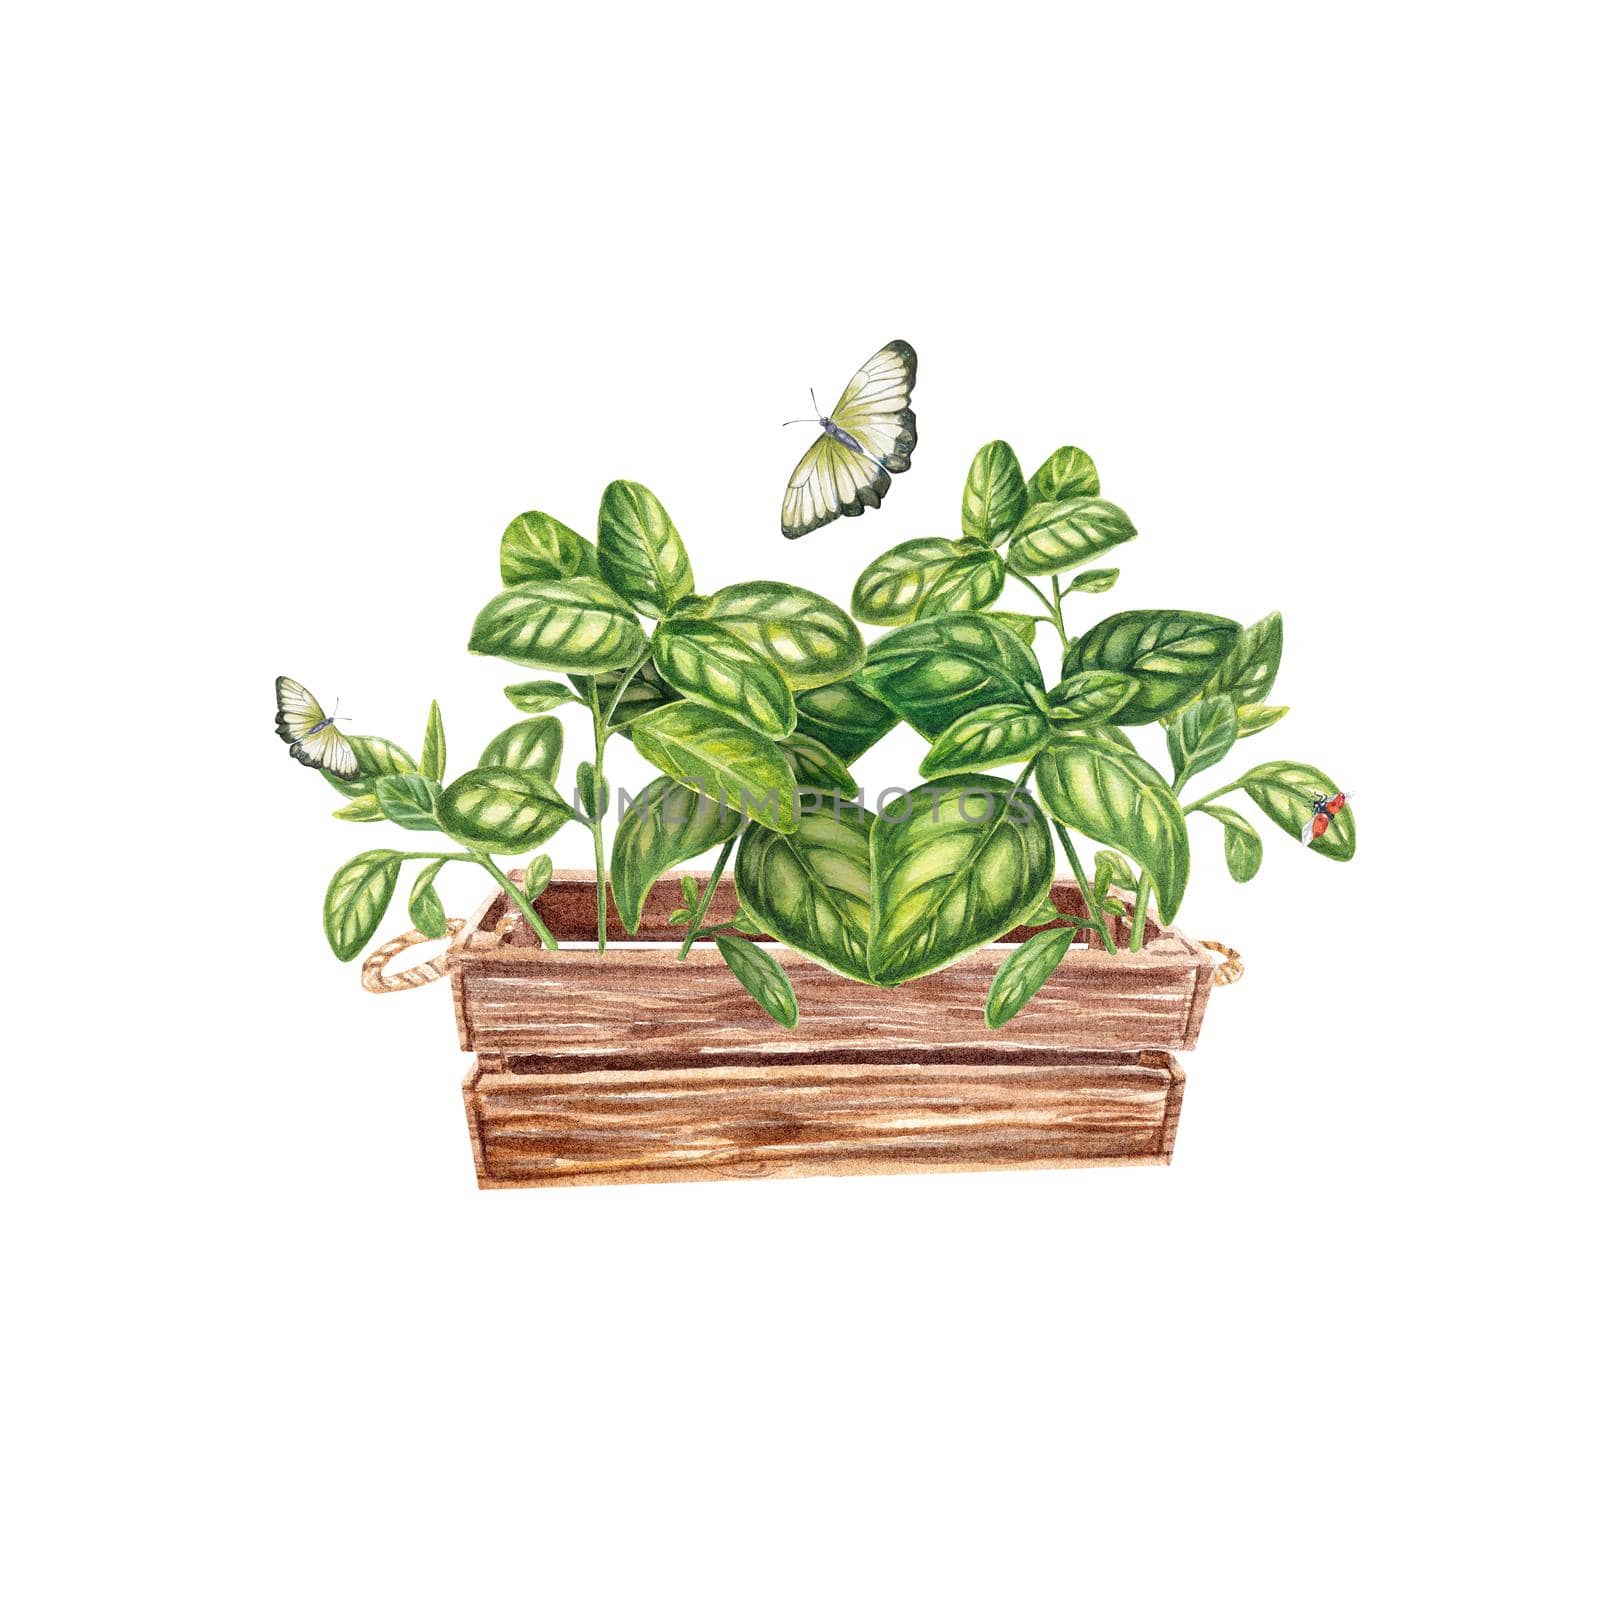 Basil in a wooden box in watercolor on a white background. Basil sprigs with butterflies. Provencal herbs, cooking, spices. The illustration is suitable for scrapbooking, stickers, design, postcards